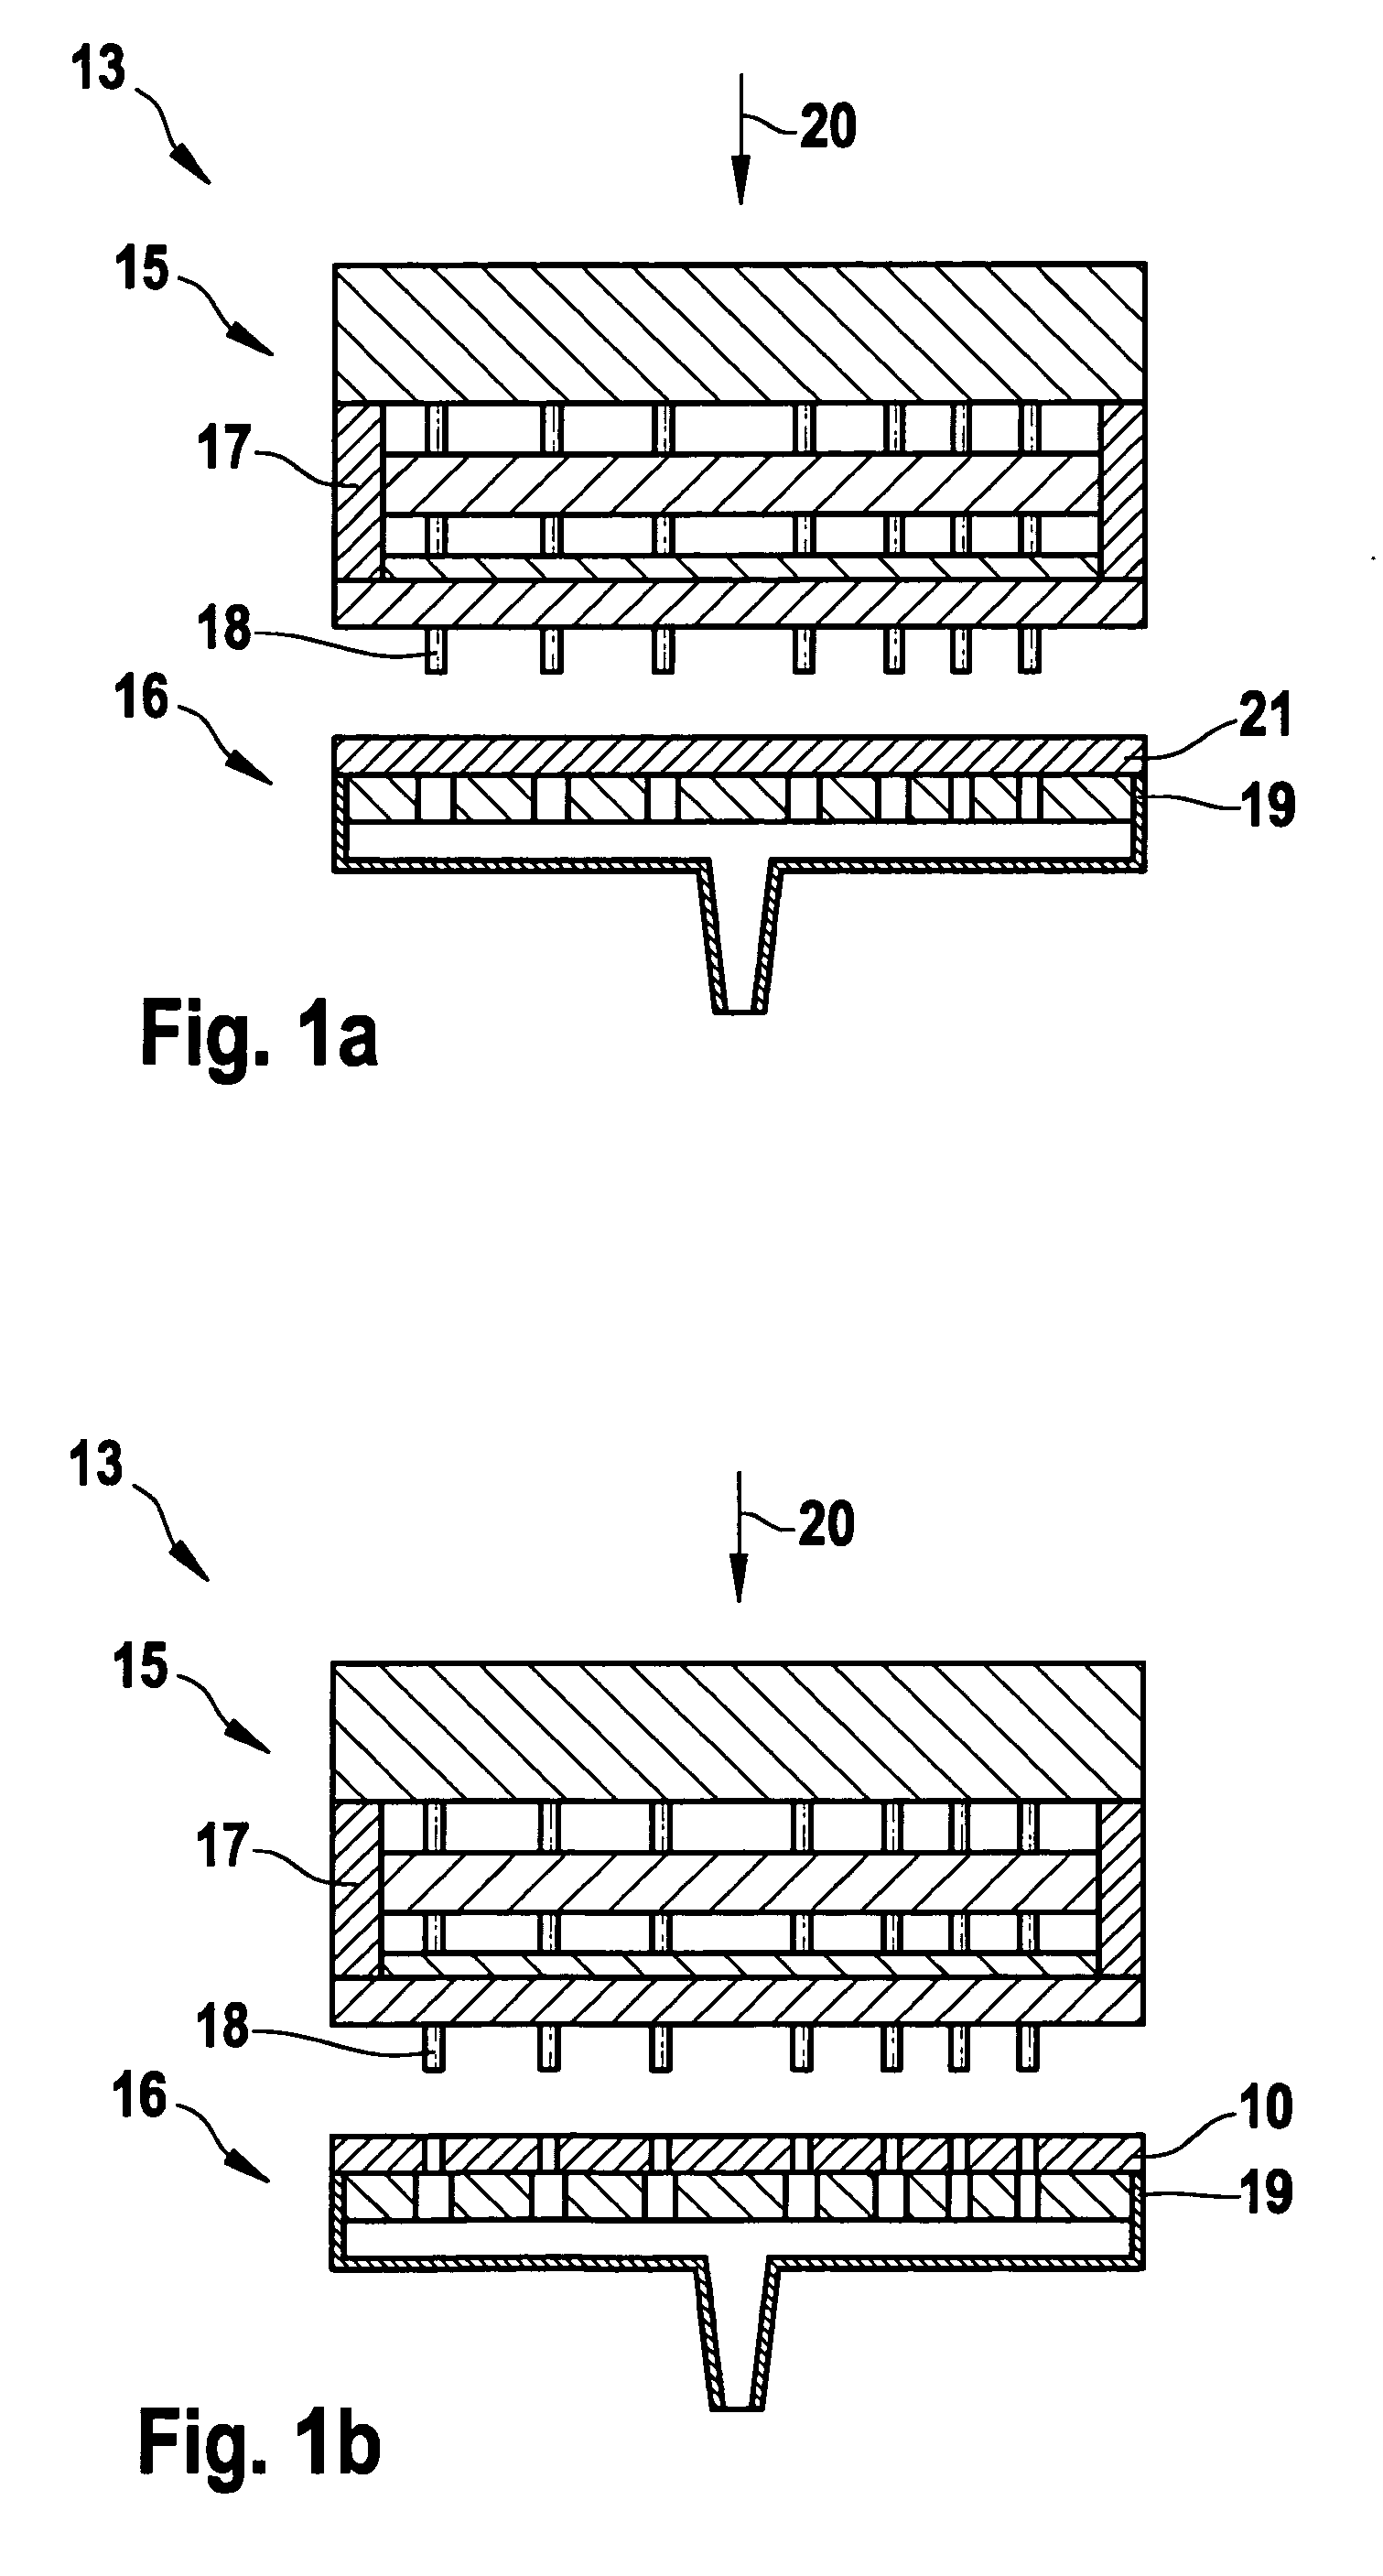 Method for Producing Printing Stencils, Particularly for Screen Printing Methods, and a Stencil Device